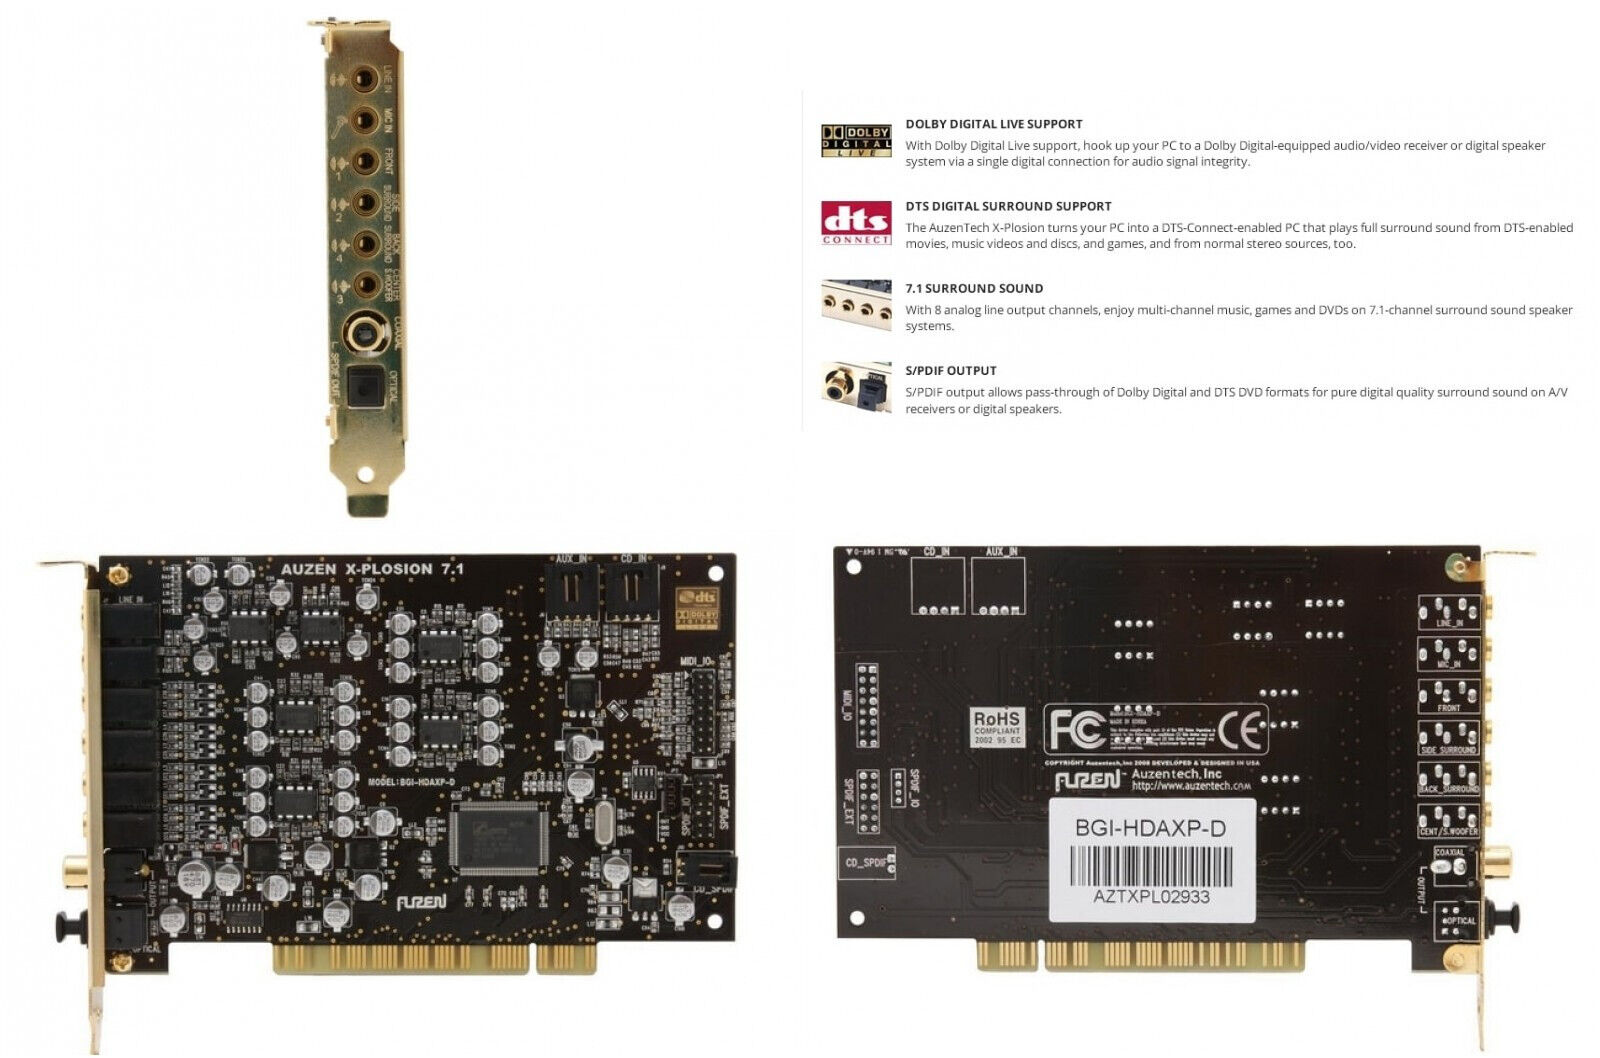 Soundblaster X C-Media Best PCI Audio Card Interface 7.1 Sound Card for Gaming